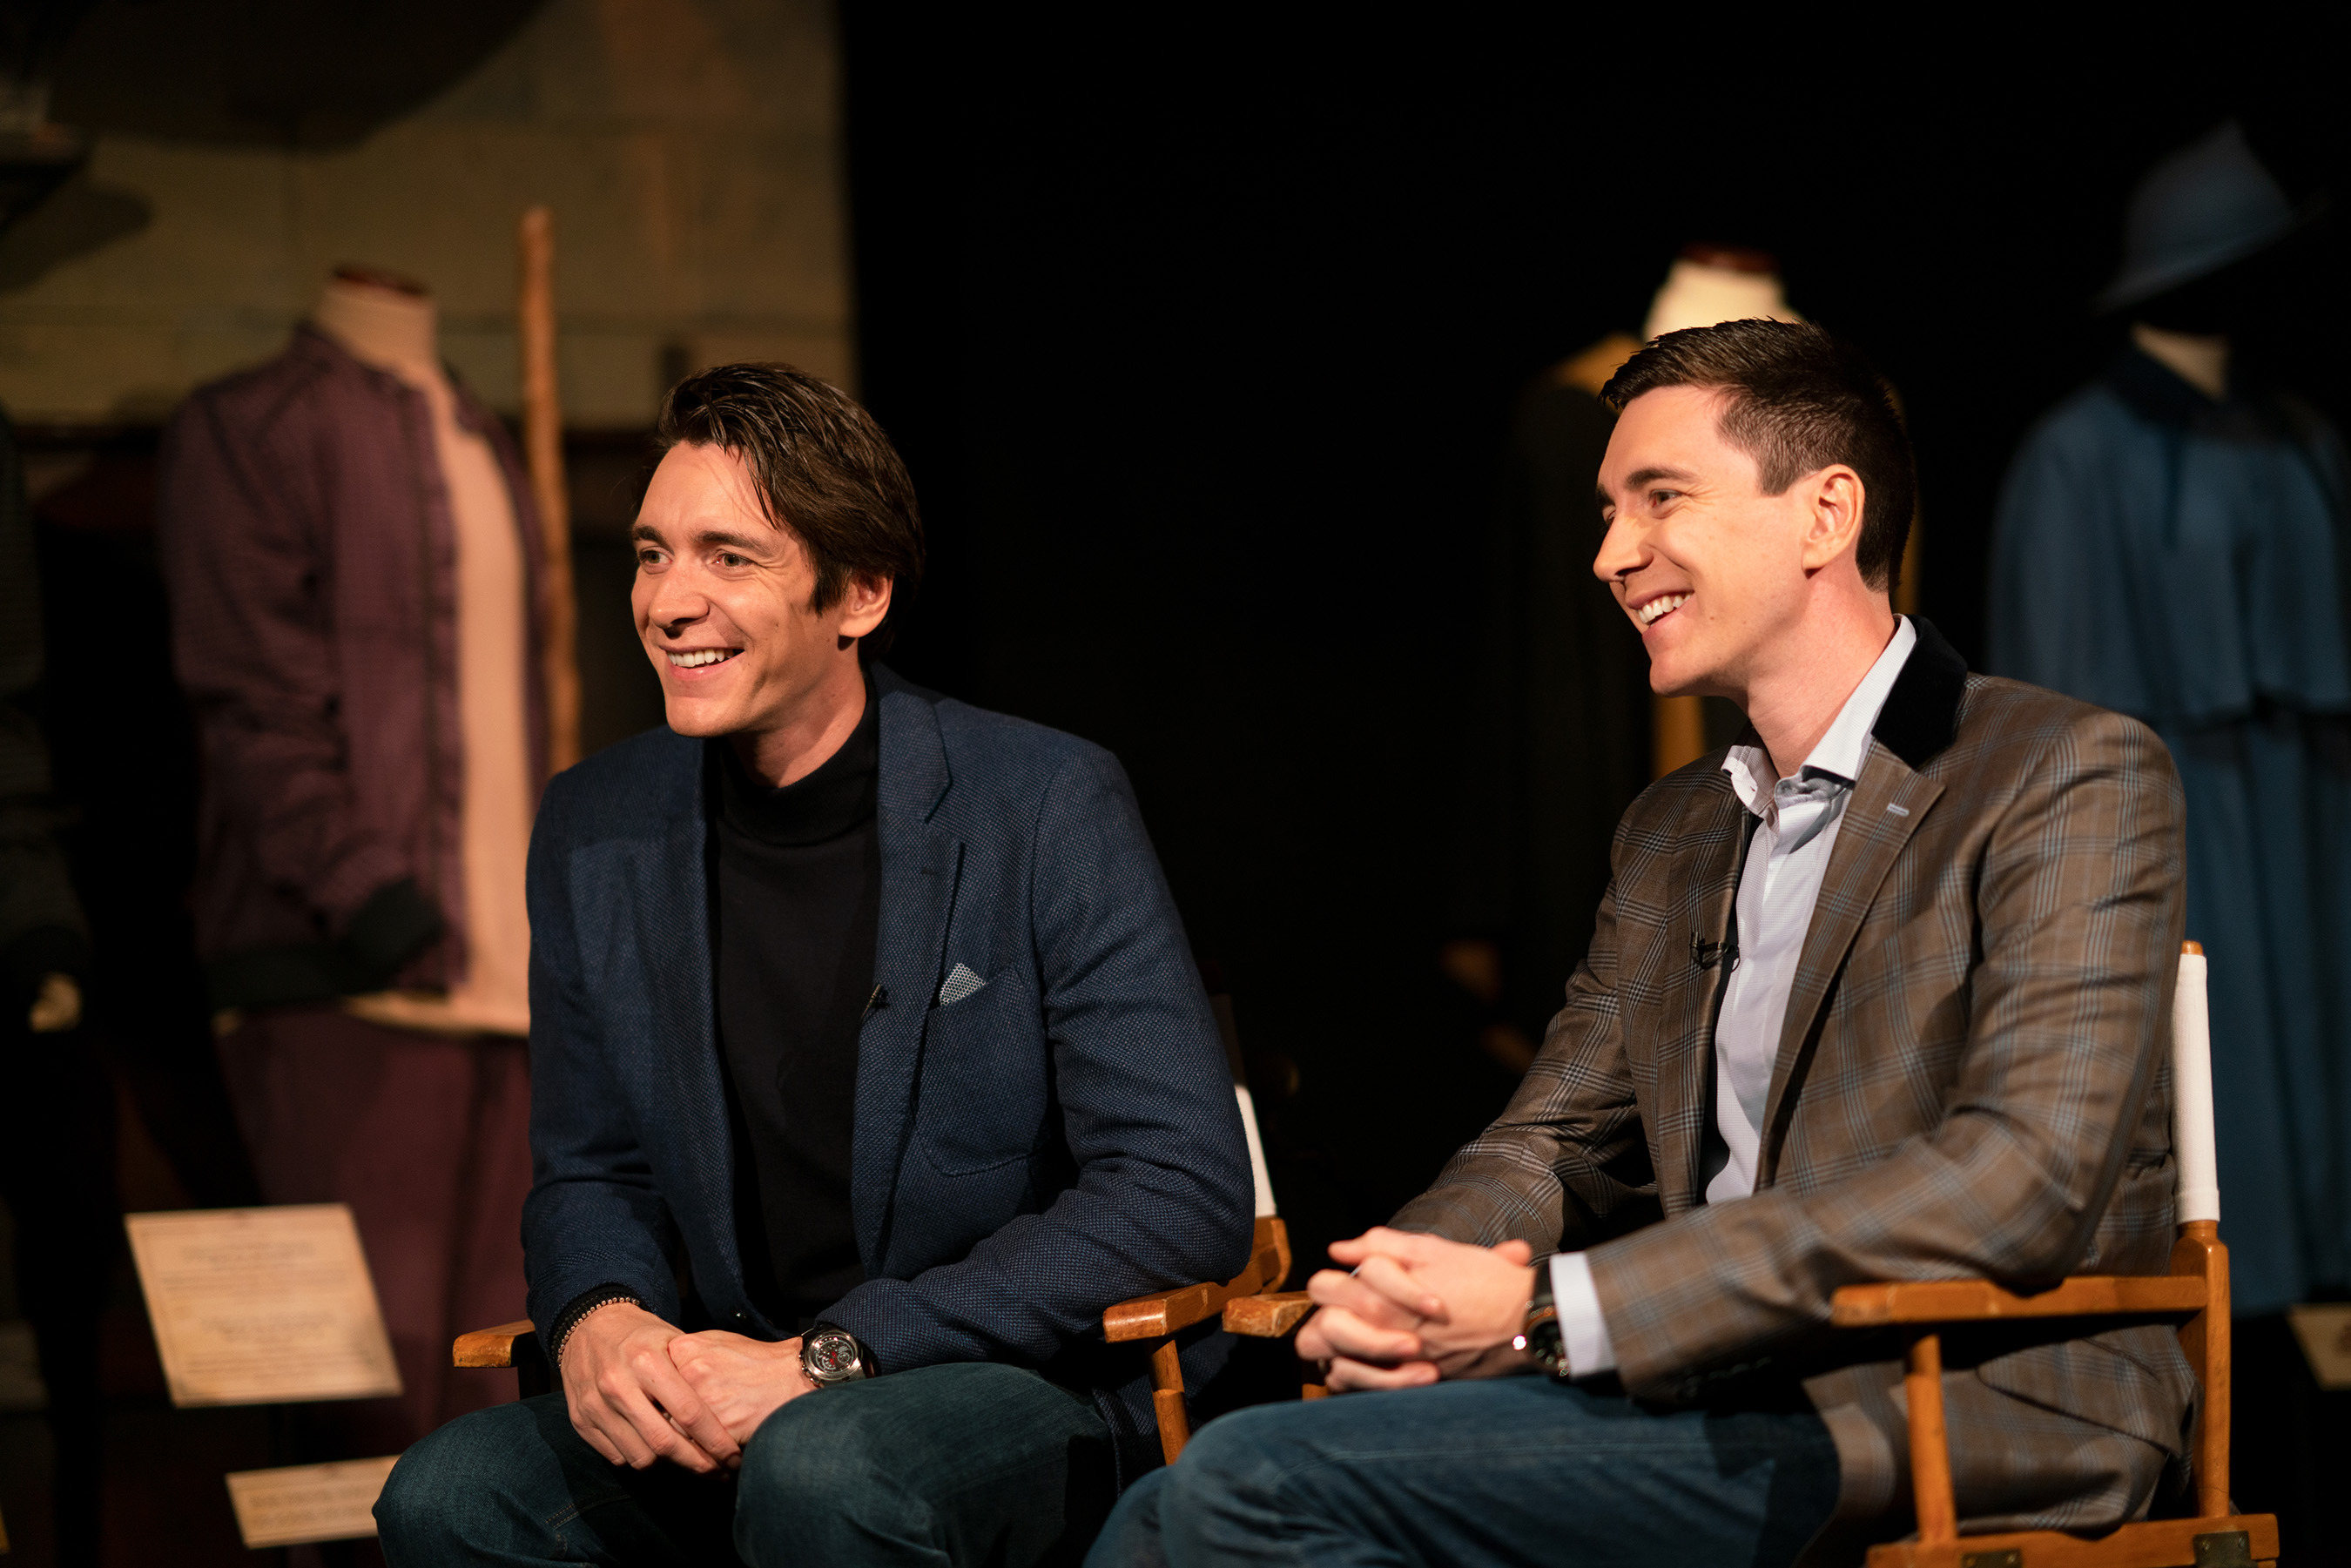 Film actors, James Phelps and Oliver Phelps at Harry Pottertm: The Exhibition at the Pavilion of Portugal in Lisbon, Portugal